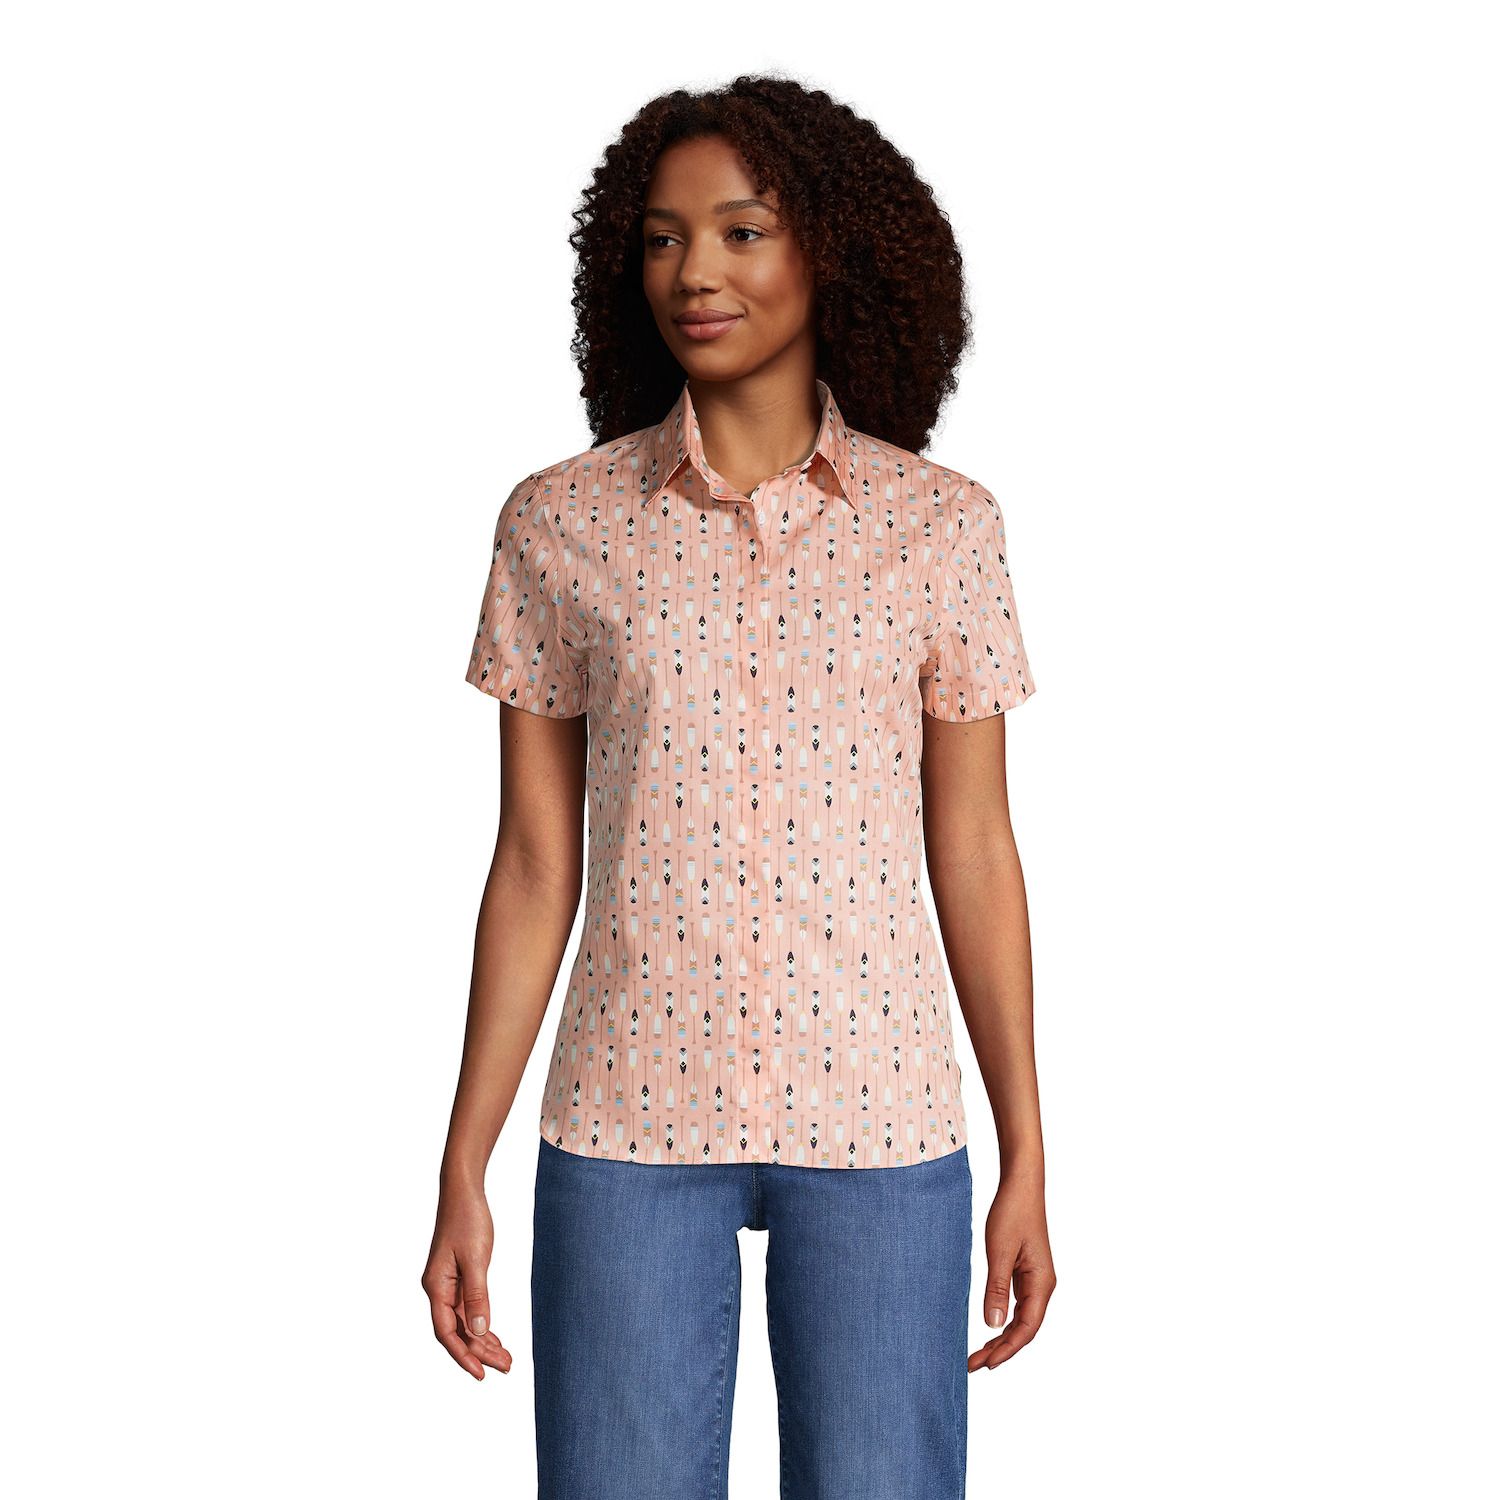 Image for Lands' End Petite No-Iron Supima Cotton Shirt at Kohl's.